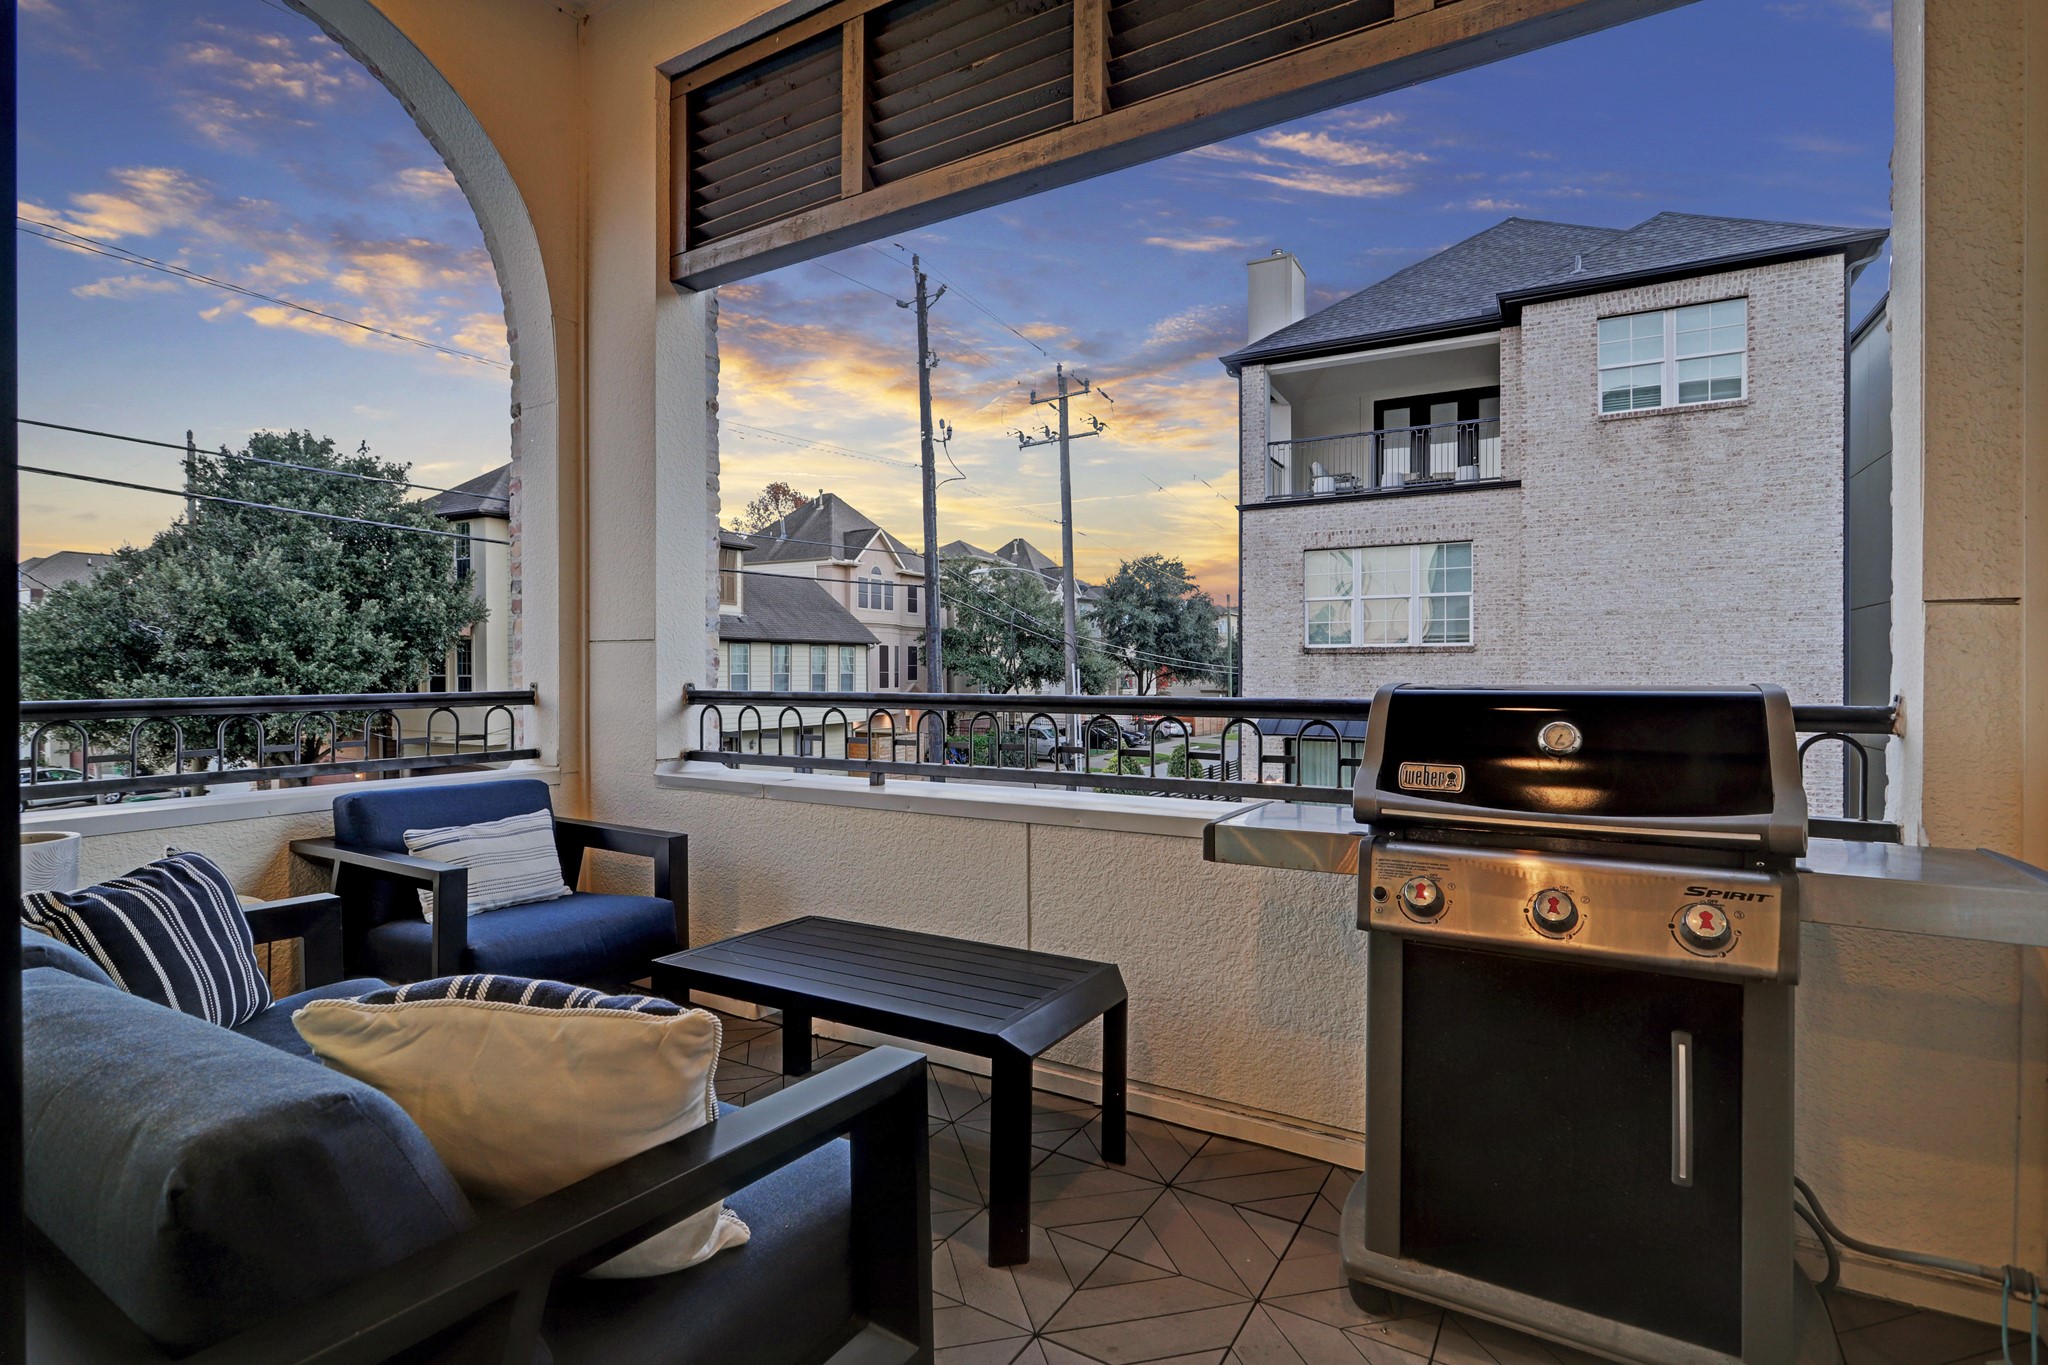 Relax on a generously sized balcony, complete with gas tap for a grill.